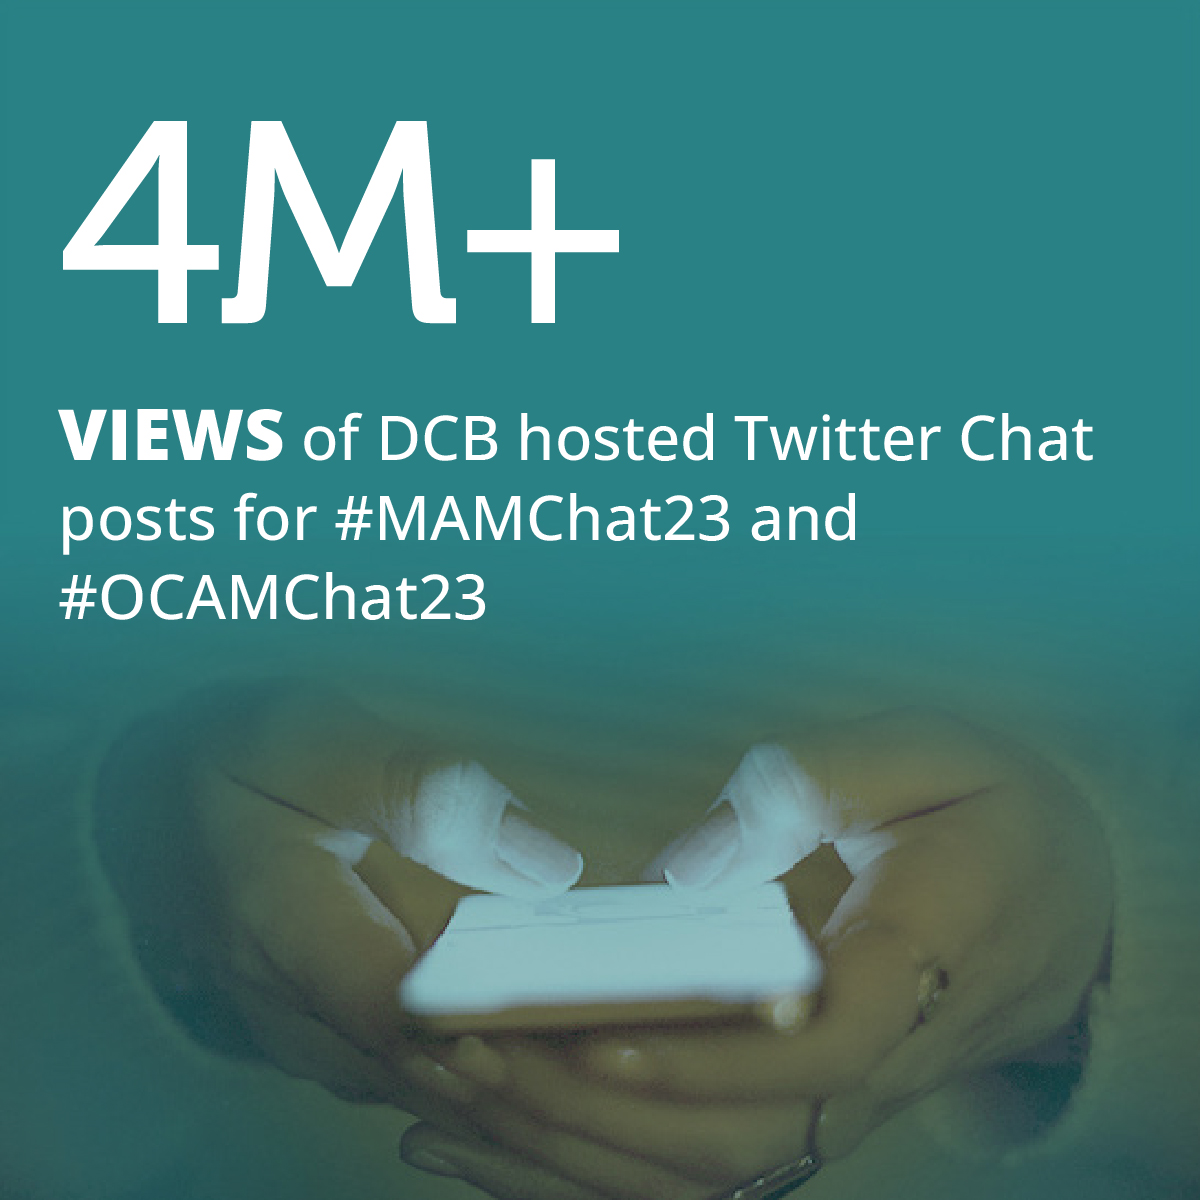 DYK that there were over 4 million views of #NCICancerBio hosted Twitter Chat posts for Melanoma Awareness Month and Ovarian Cancer Awareness Month? cancer.gov/about-nci/orga… #MAMChat23 #OCAMChat23